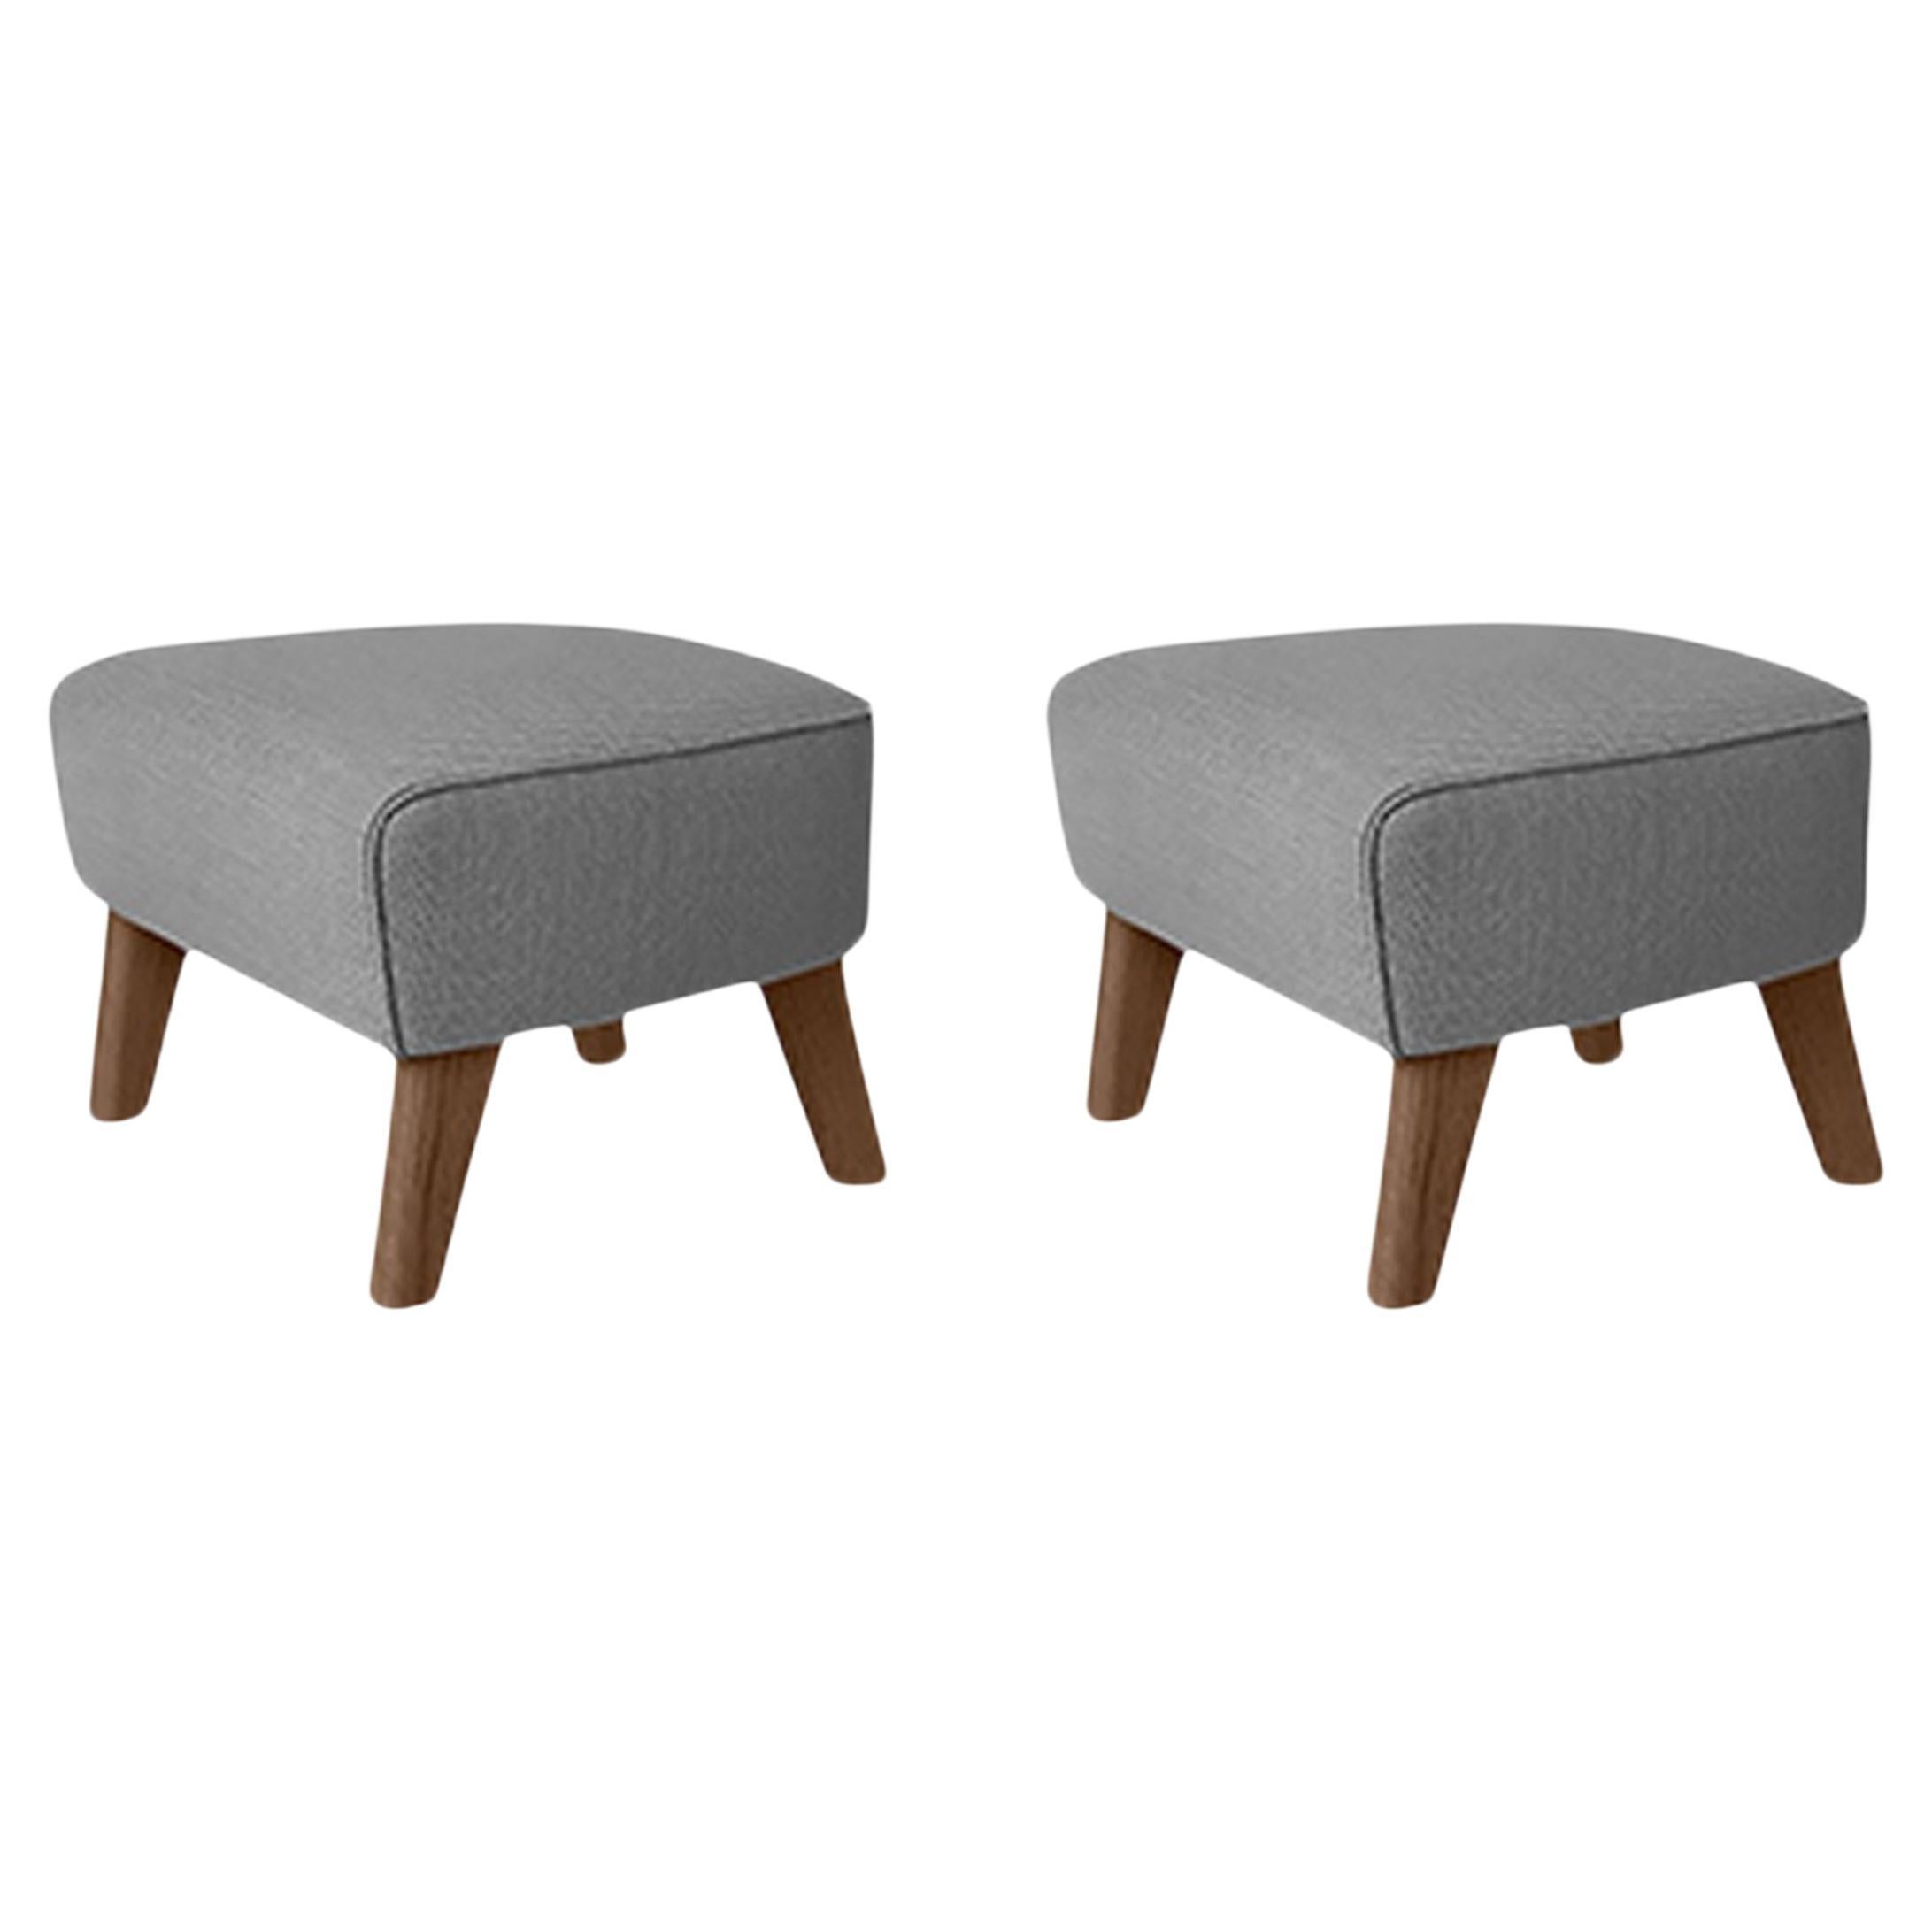 Set of 2 Grey and Smoked Oak Raf Simons Vidar 3 My Own Chair Footstool by Lassen For Sale